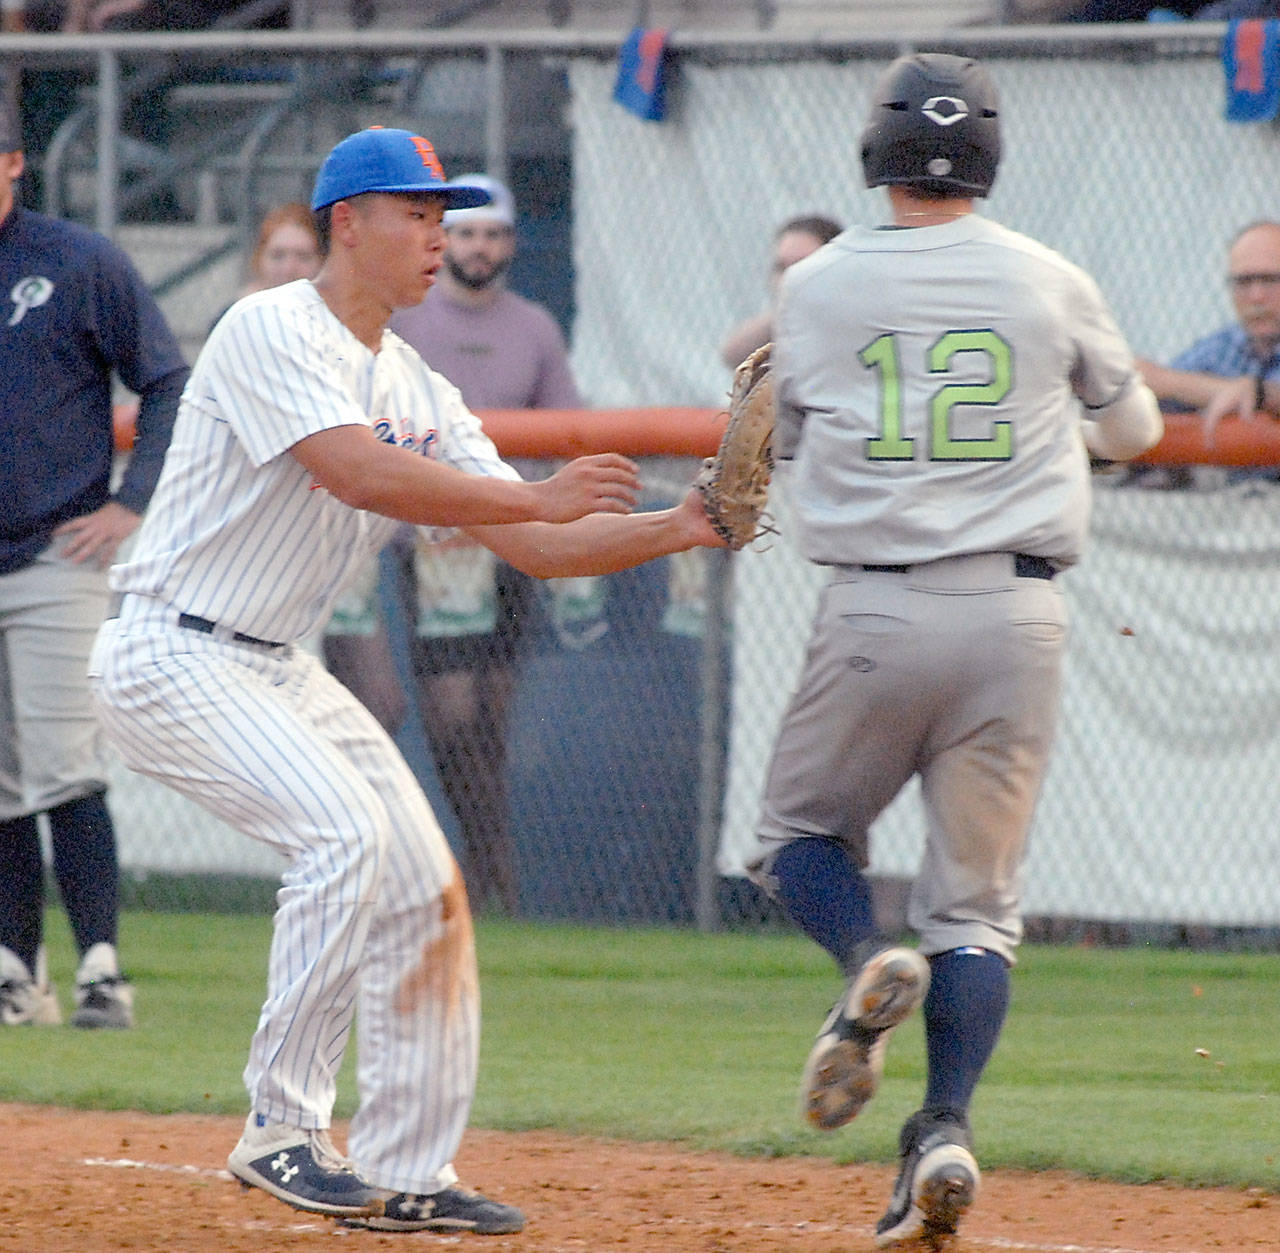 Lefties first baseman Nathan Chong, left, tags out Portland’s Gabe Skoro before he can reach first in the third inning on Tuesday at Port Angeles Civic Field. (Keith Thorpe/Peninsula Daily News)